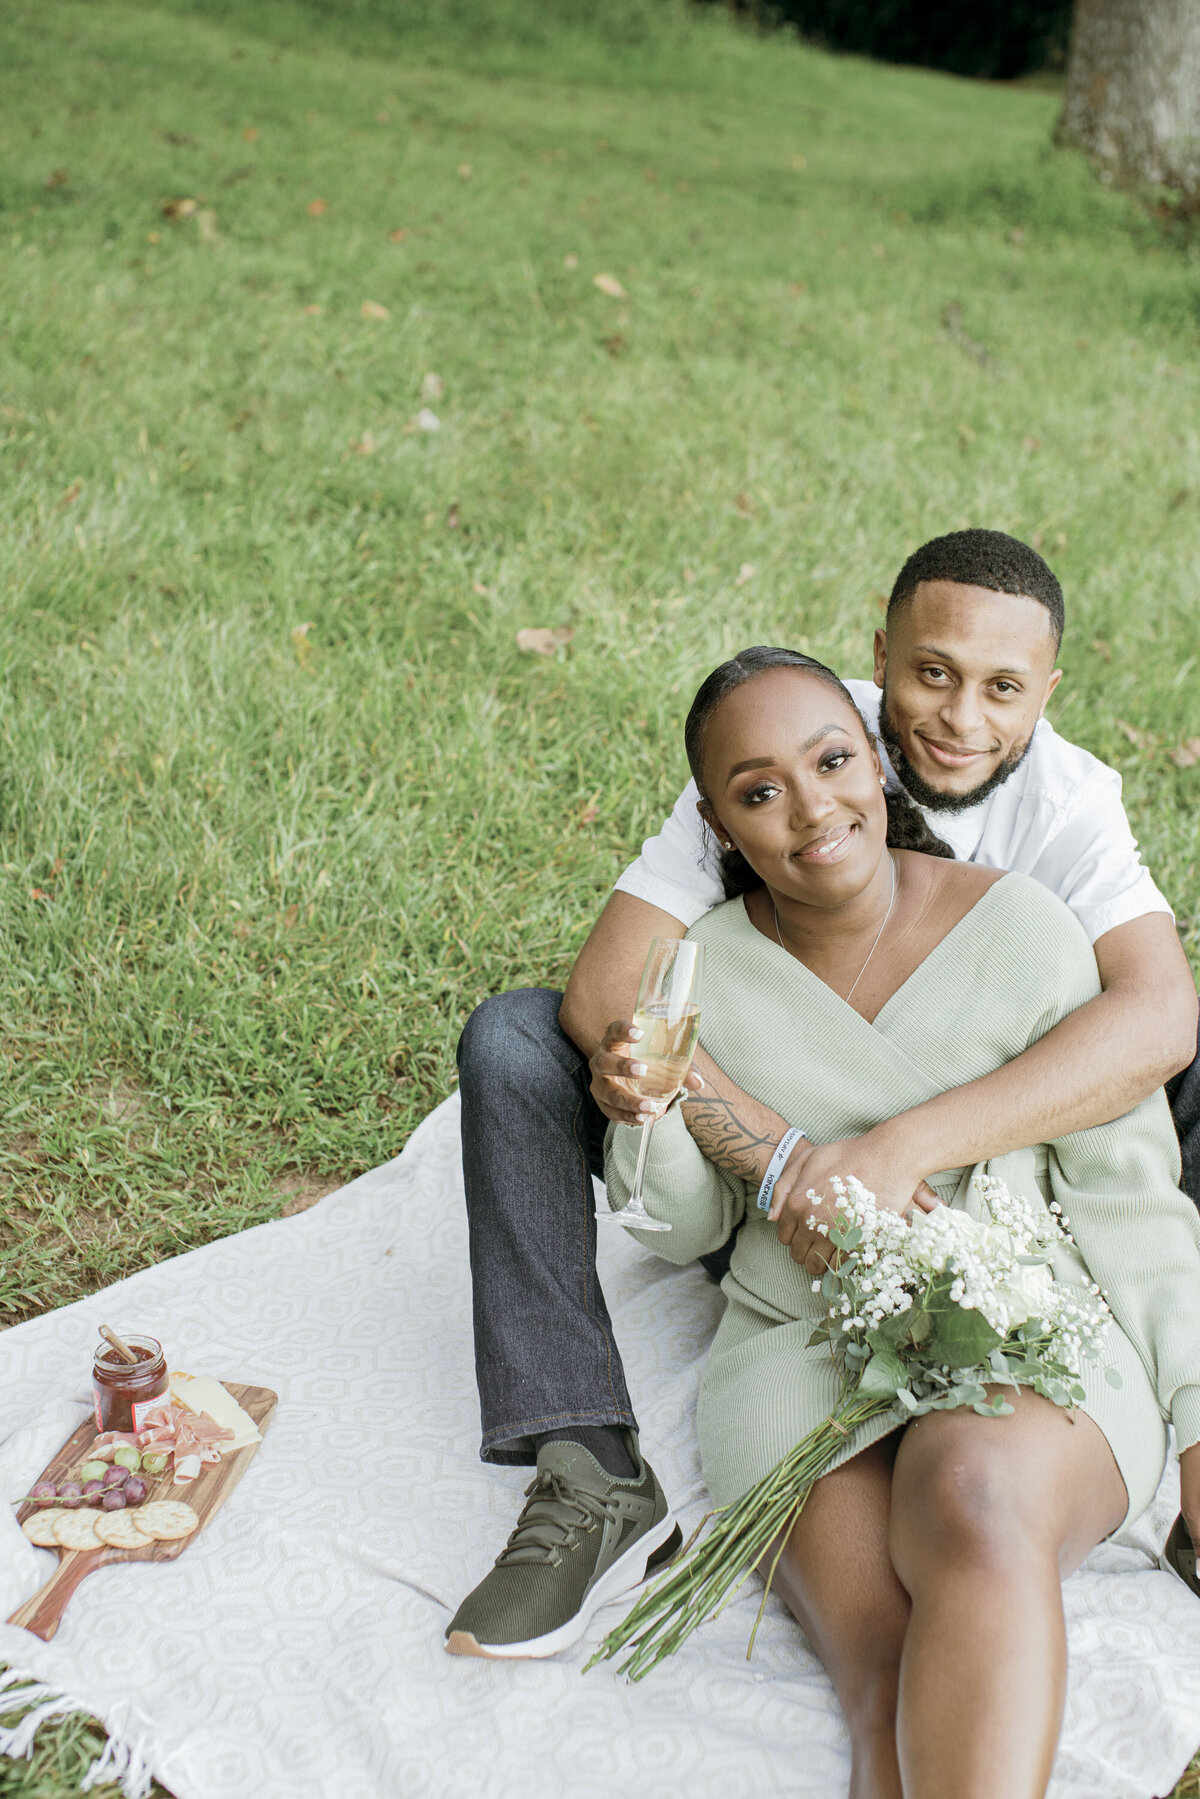 Engagement Photographer in Maryland